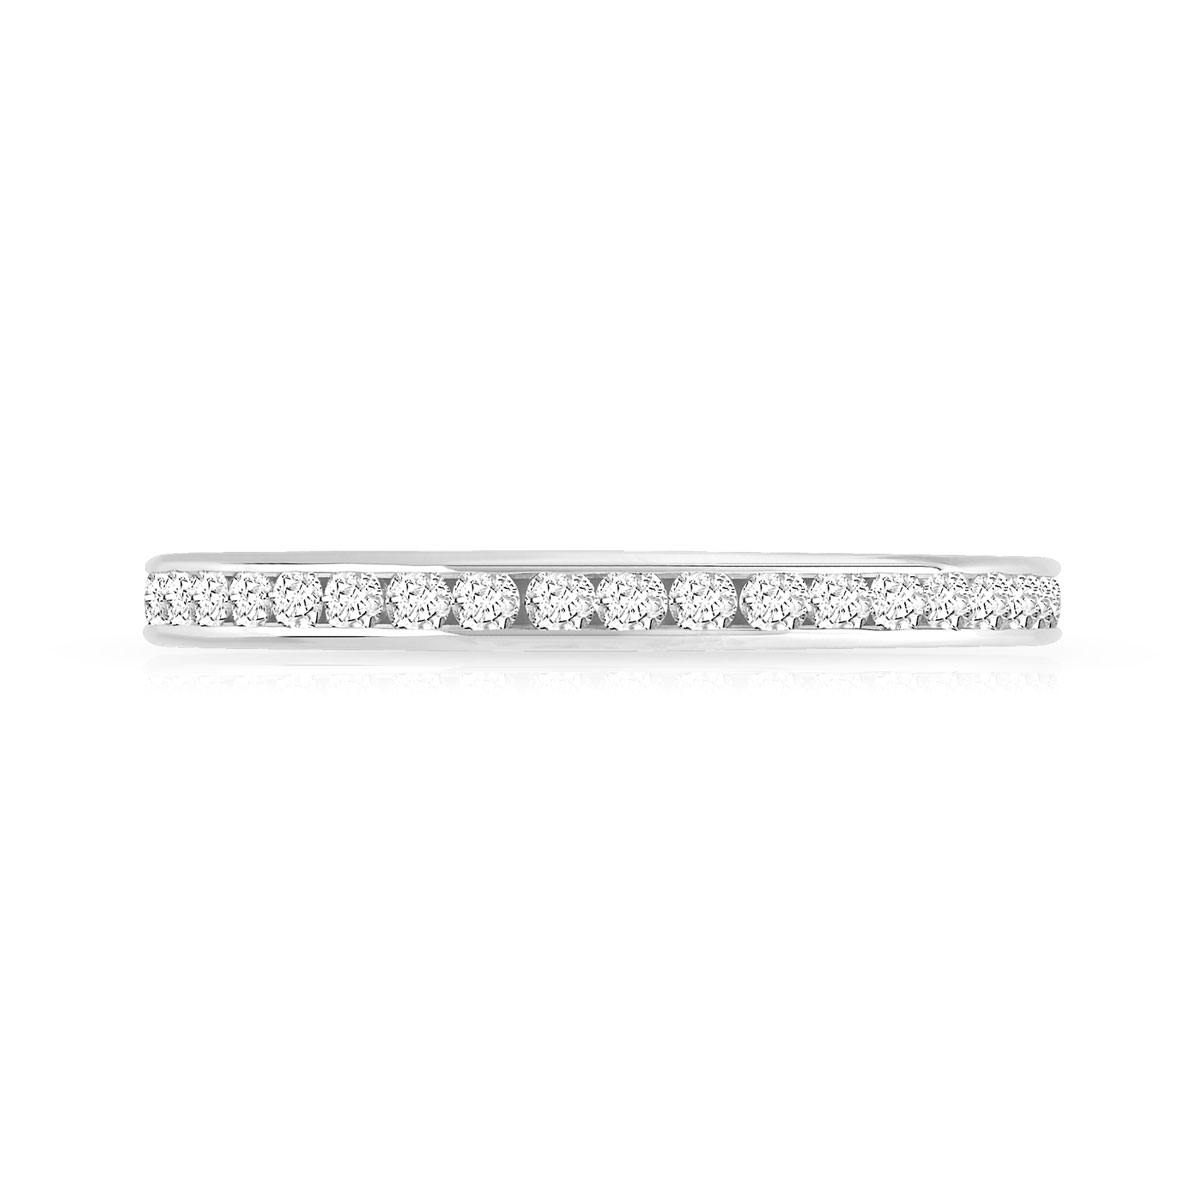 Alliance or 750 blanc diamants synthétiques 0.50ct - vue 3